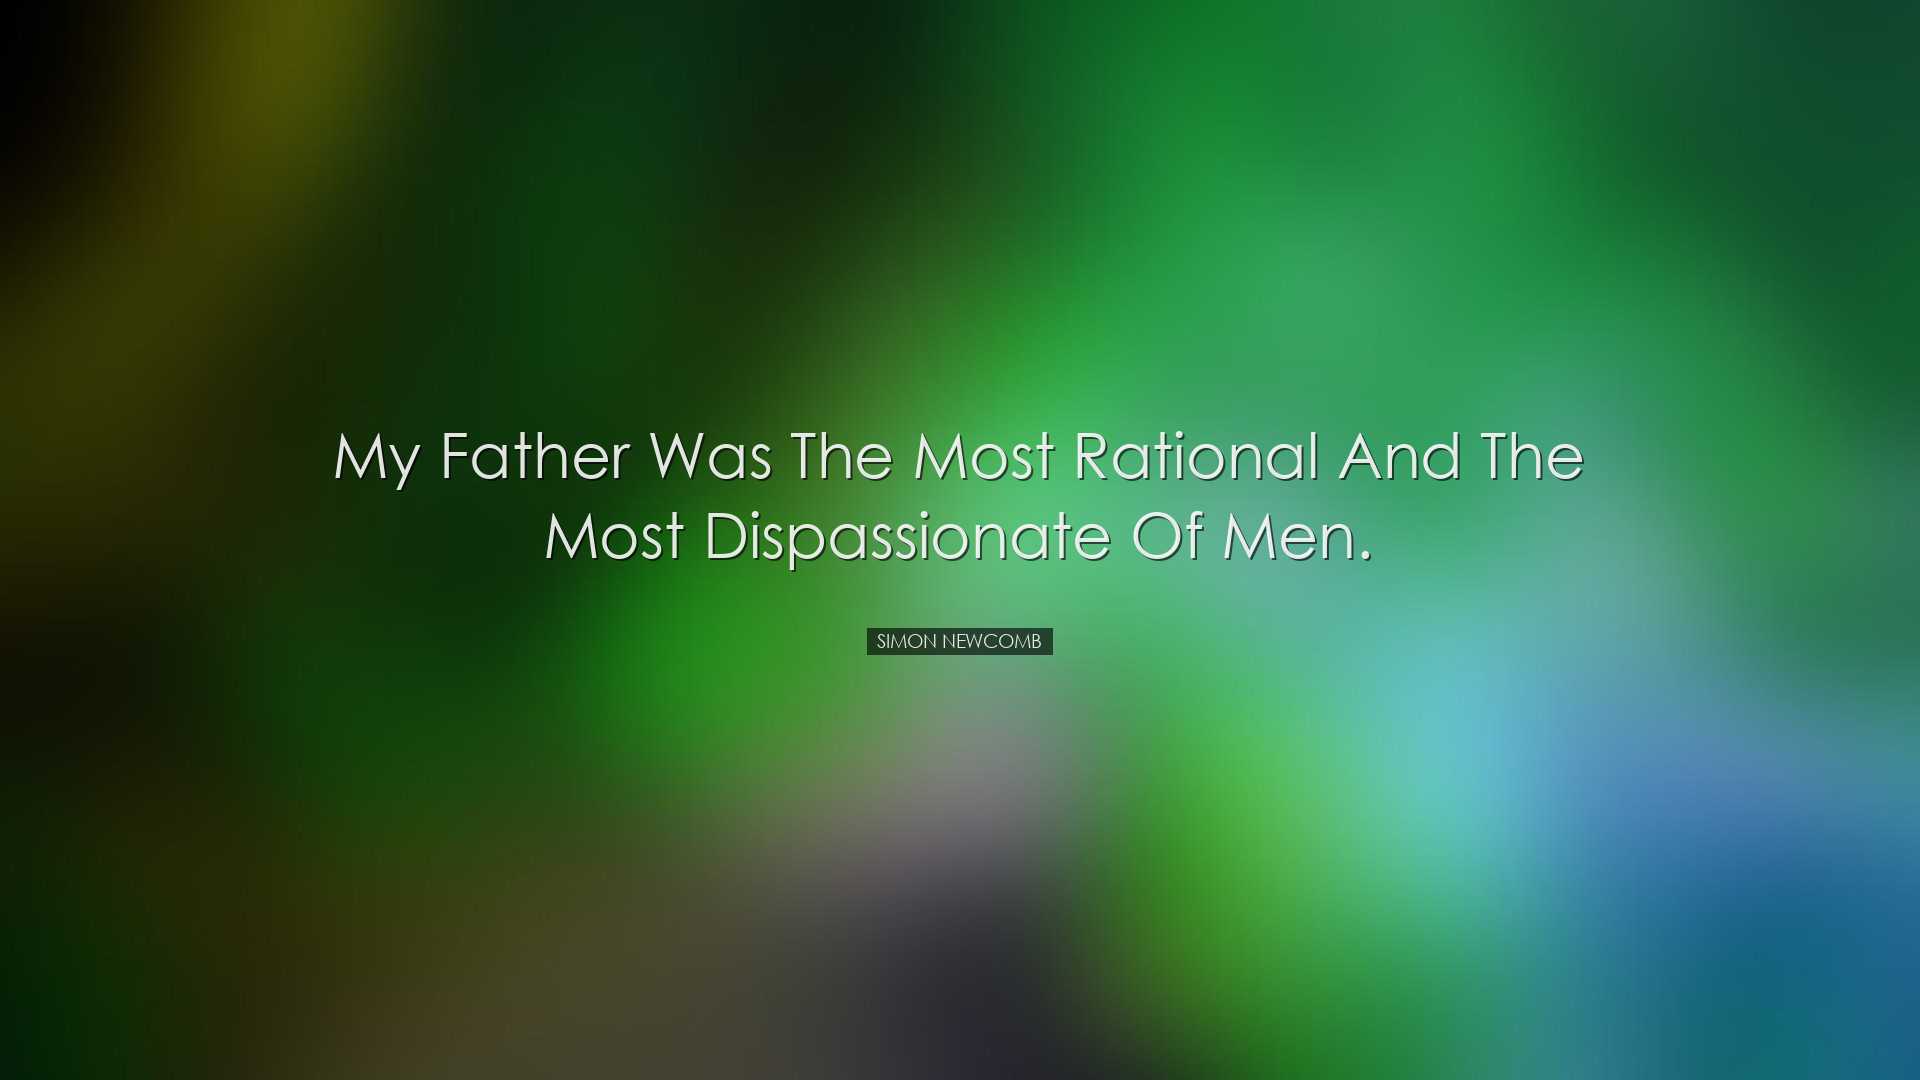 My father was the most rational and the most dispassionate of men.